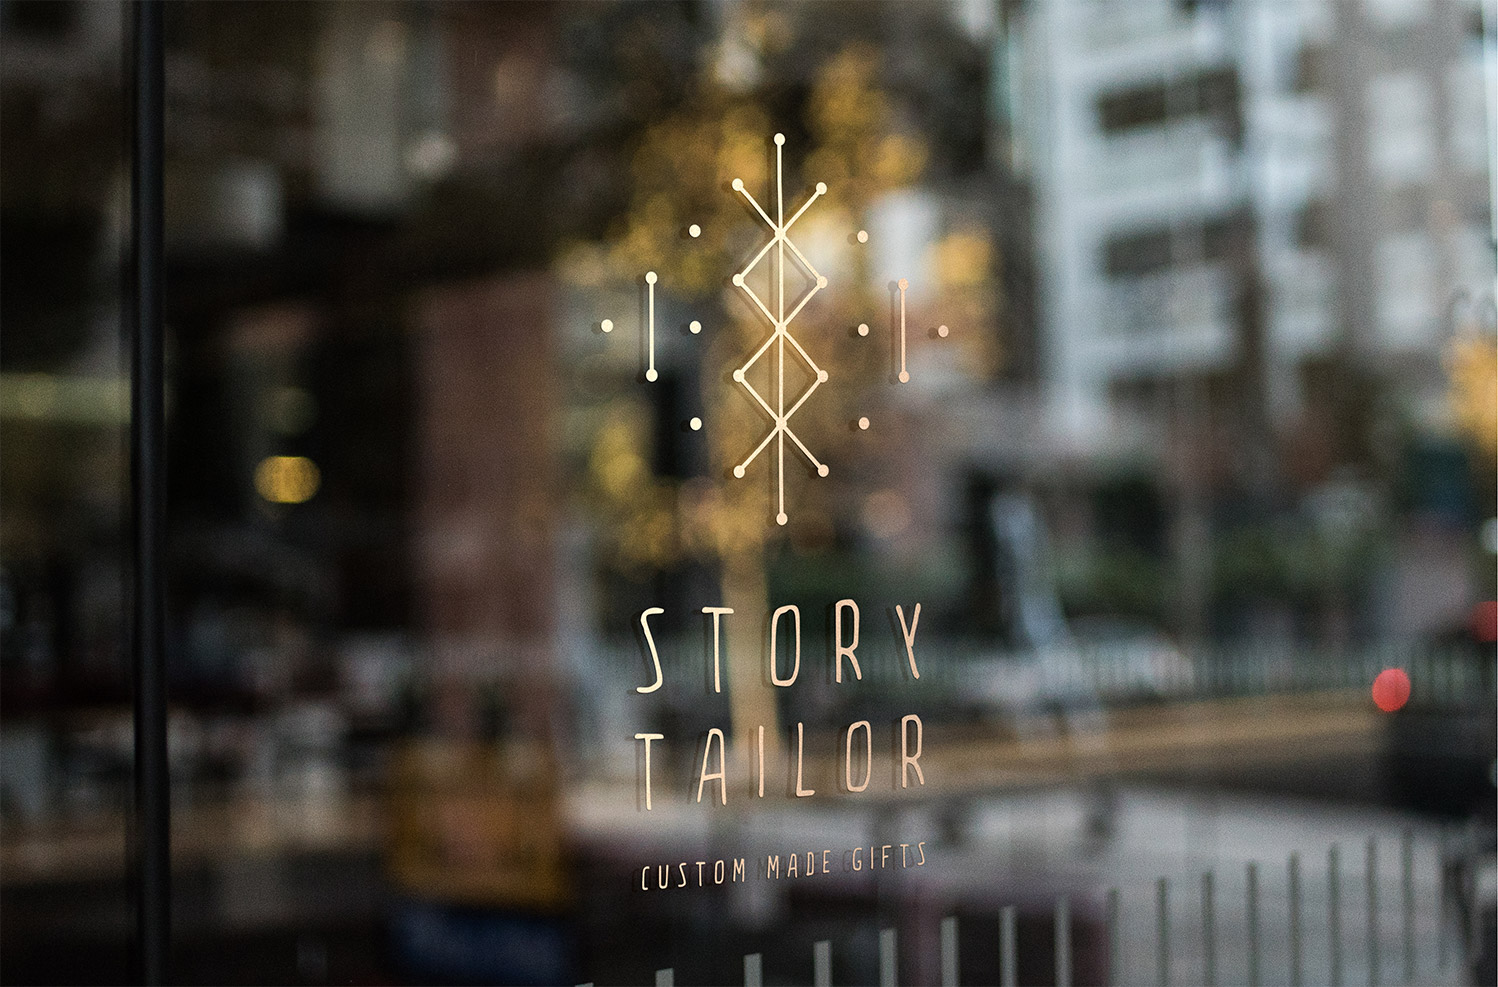 STORY Tailor, Crossing Parallels Studio